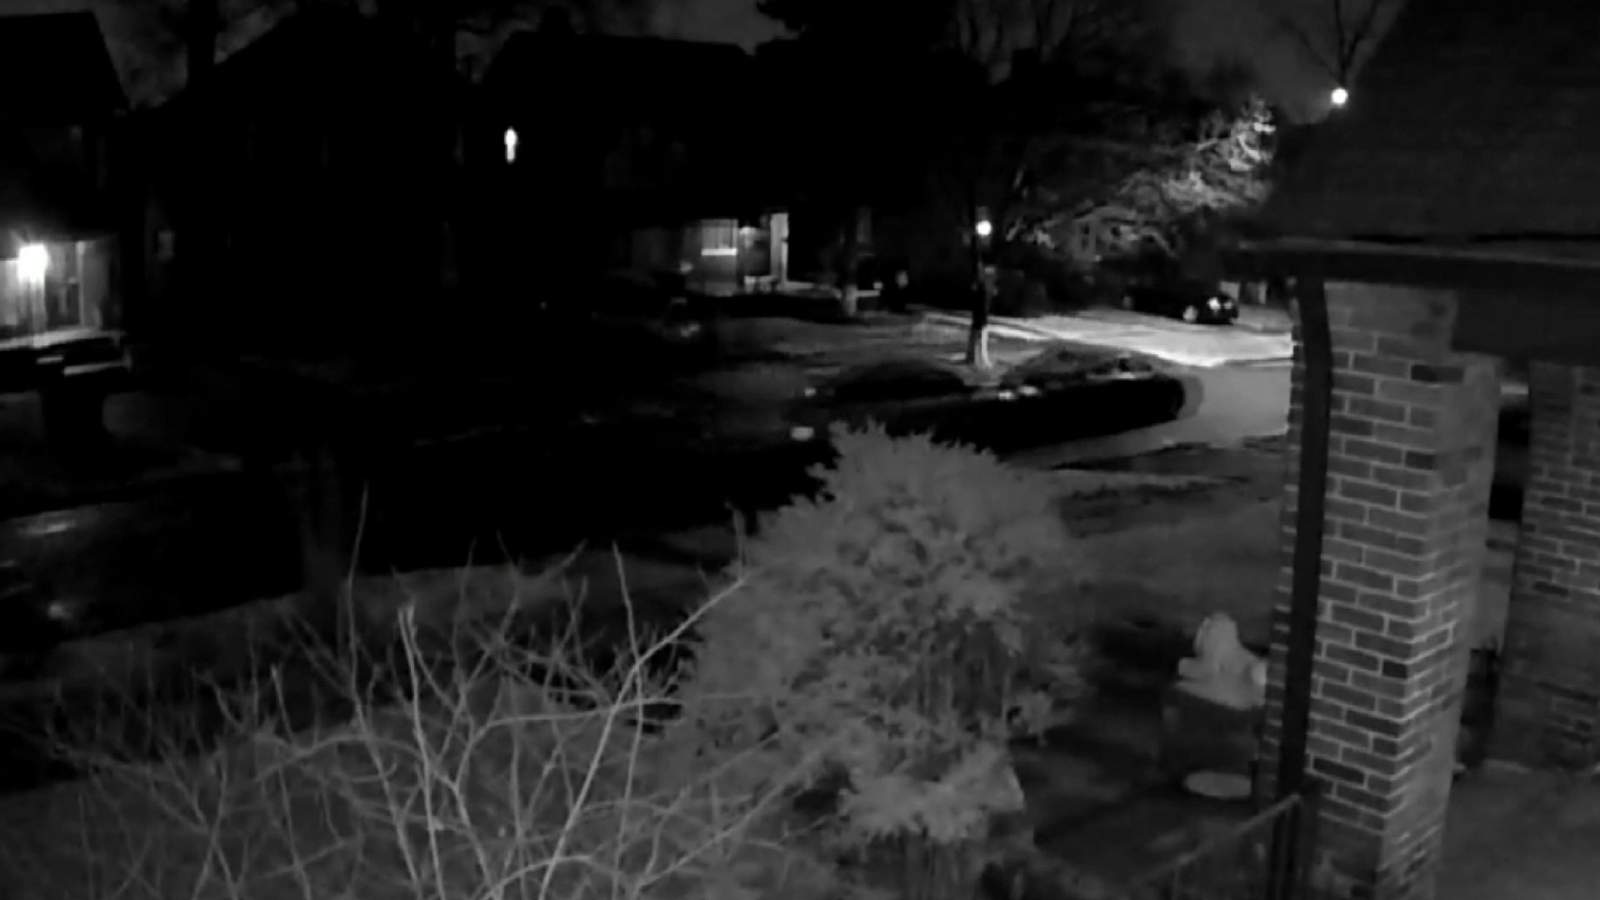 Thieves caught on camera stealing a car in Detroit by pushing it with another vehicle